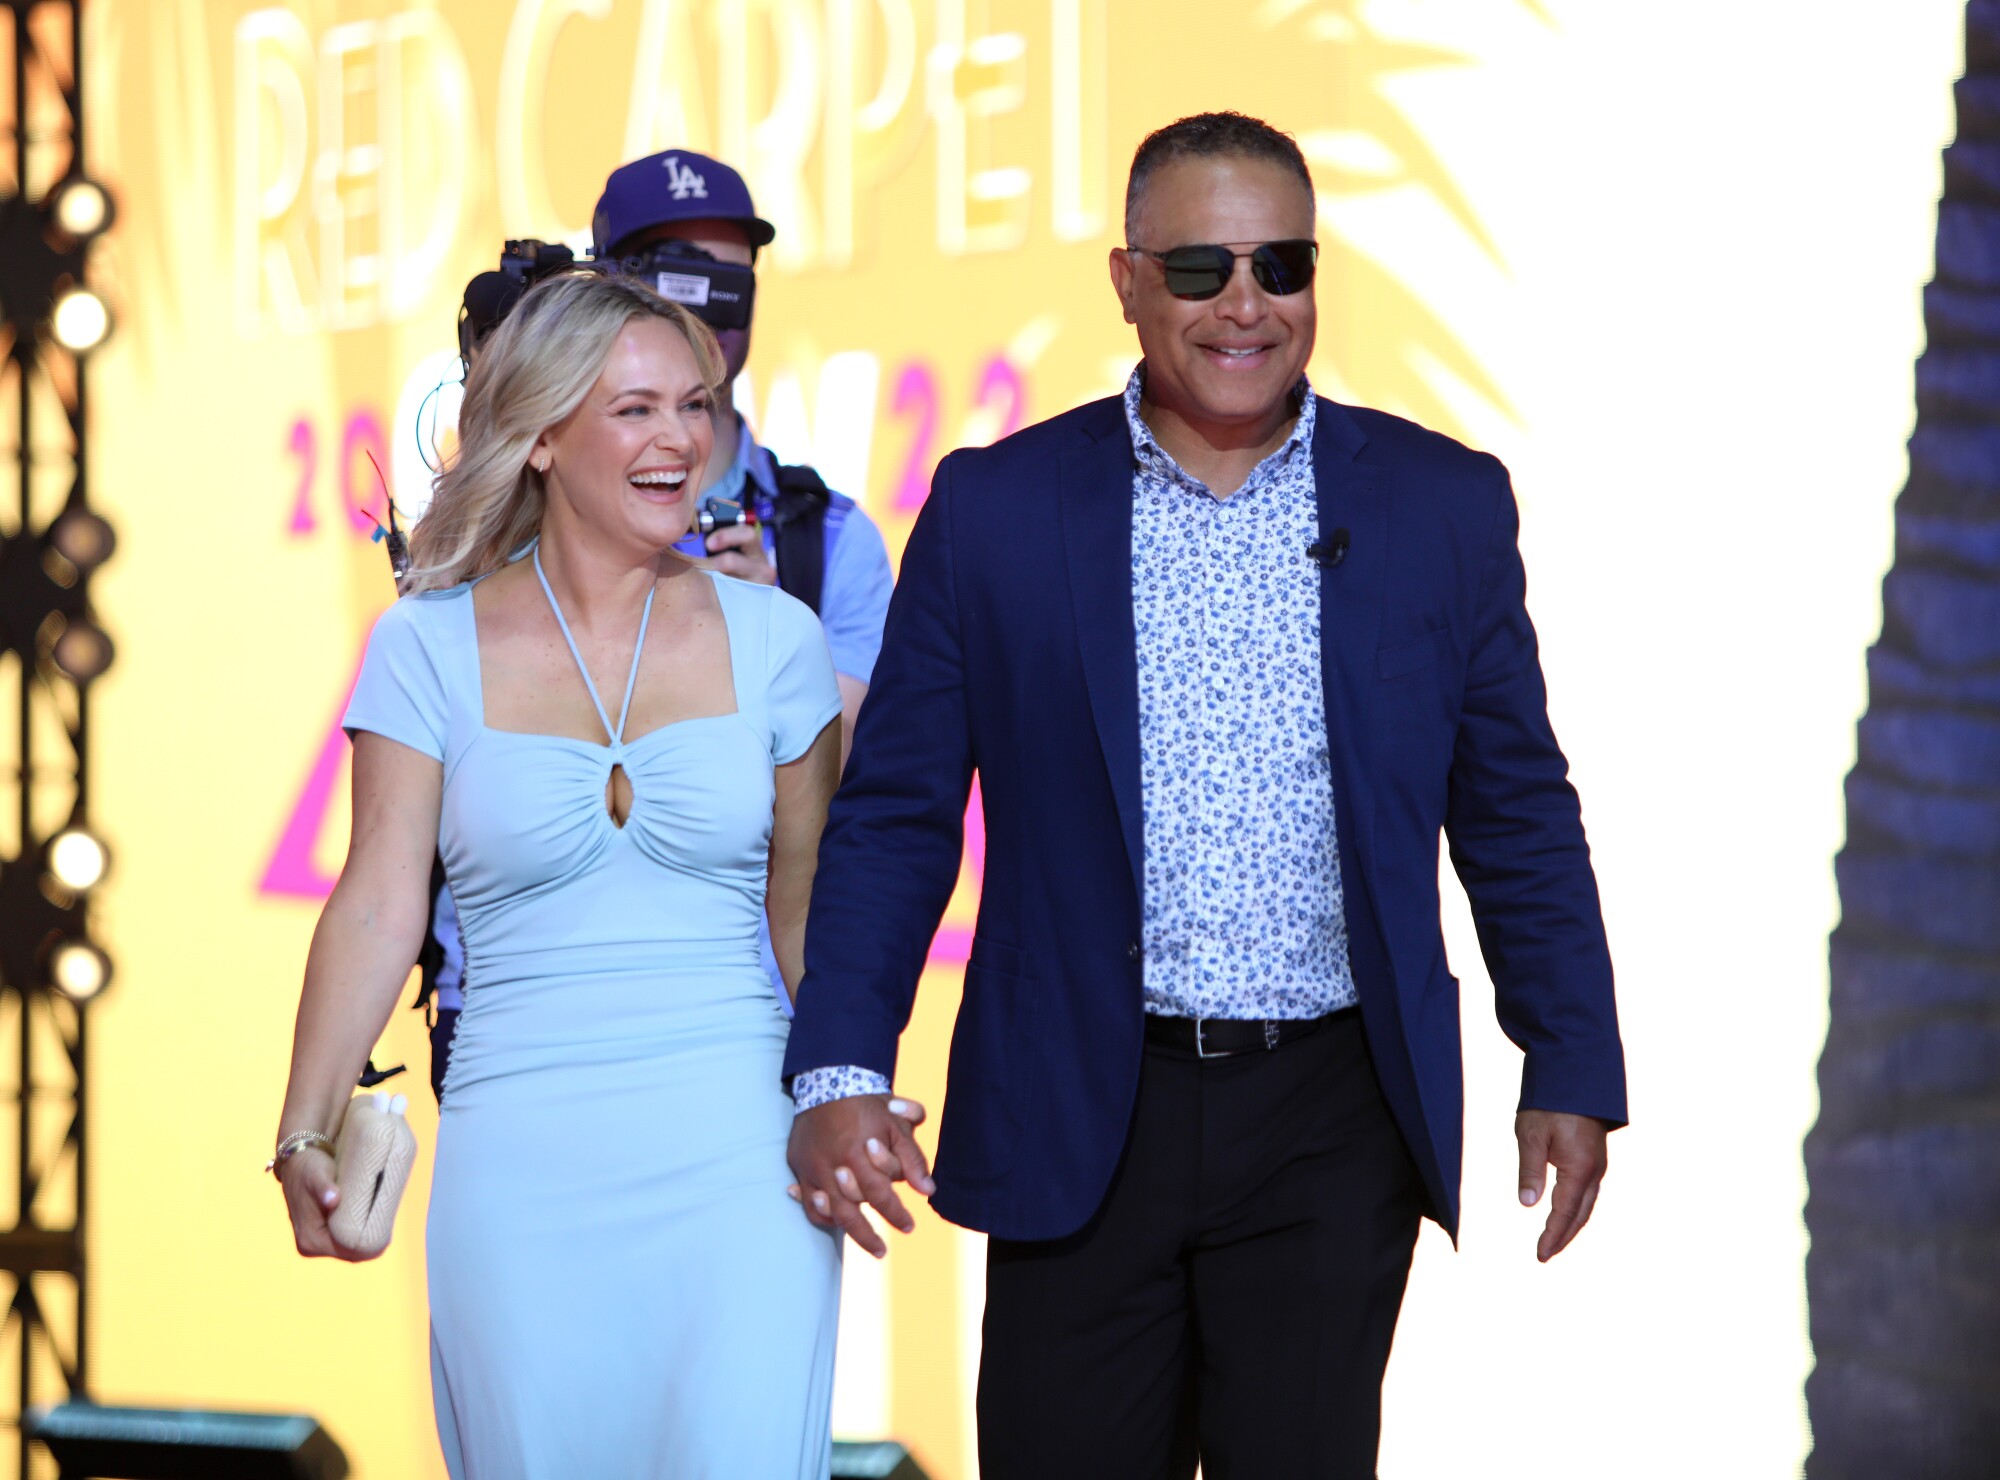 Dodgers manager Dave Roberts arrives with his wife on the red carpet for the 2022 MLB All-Star Game.